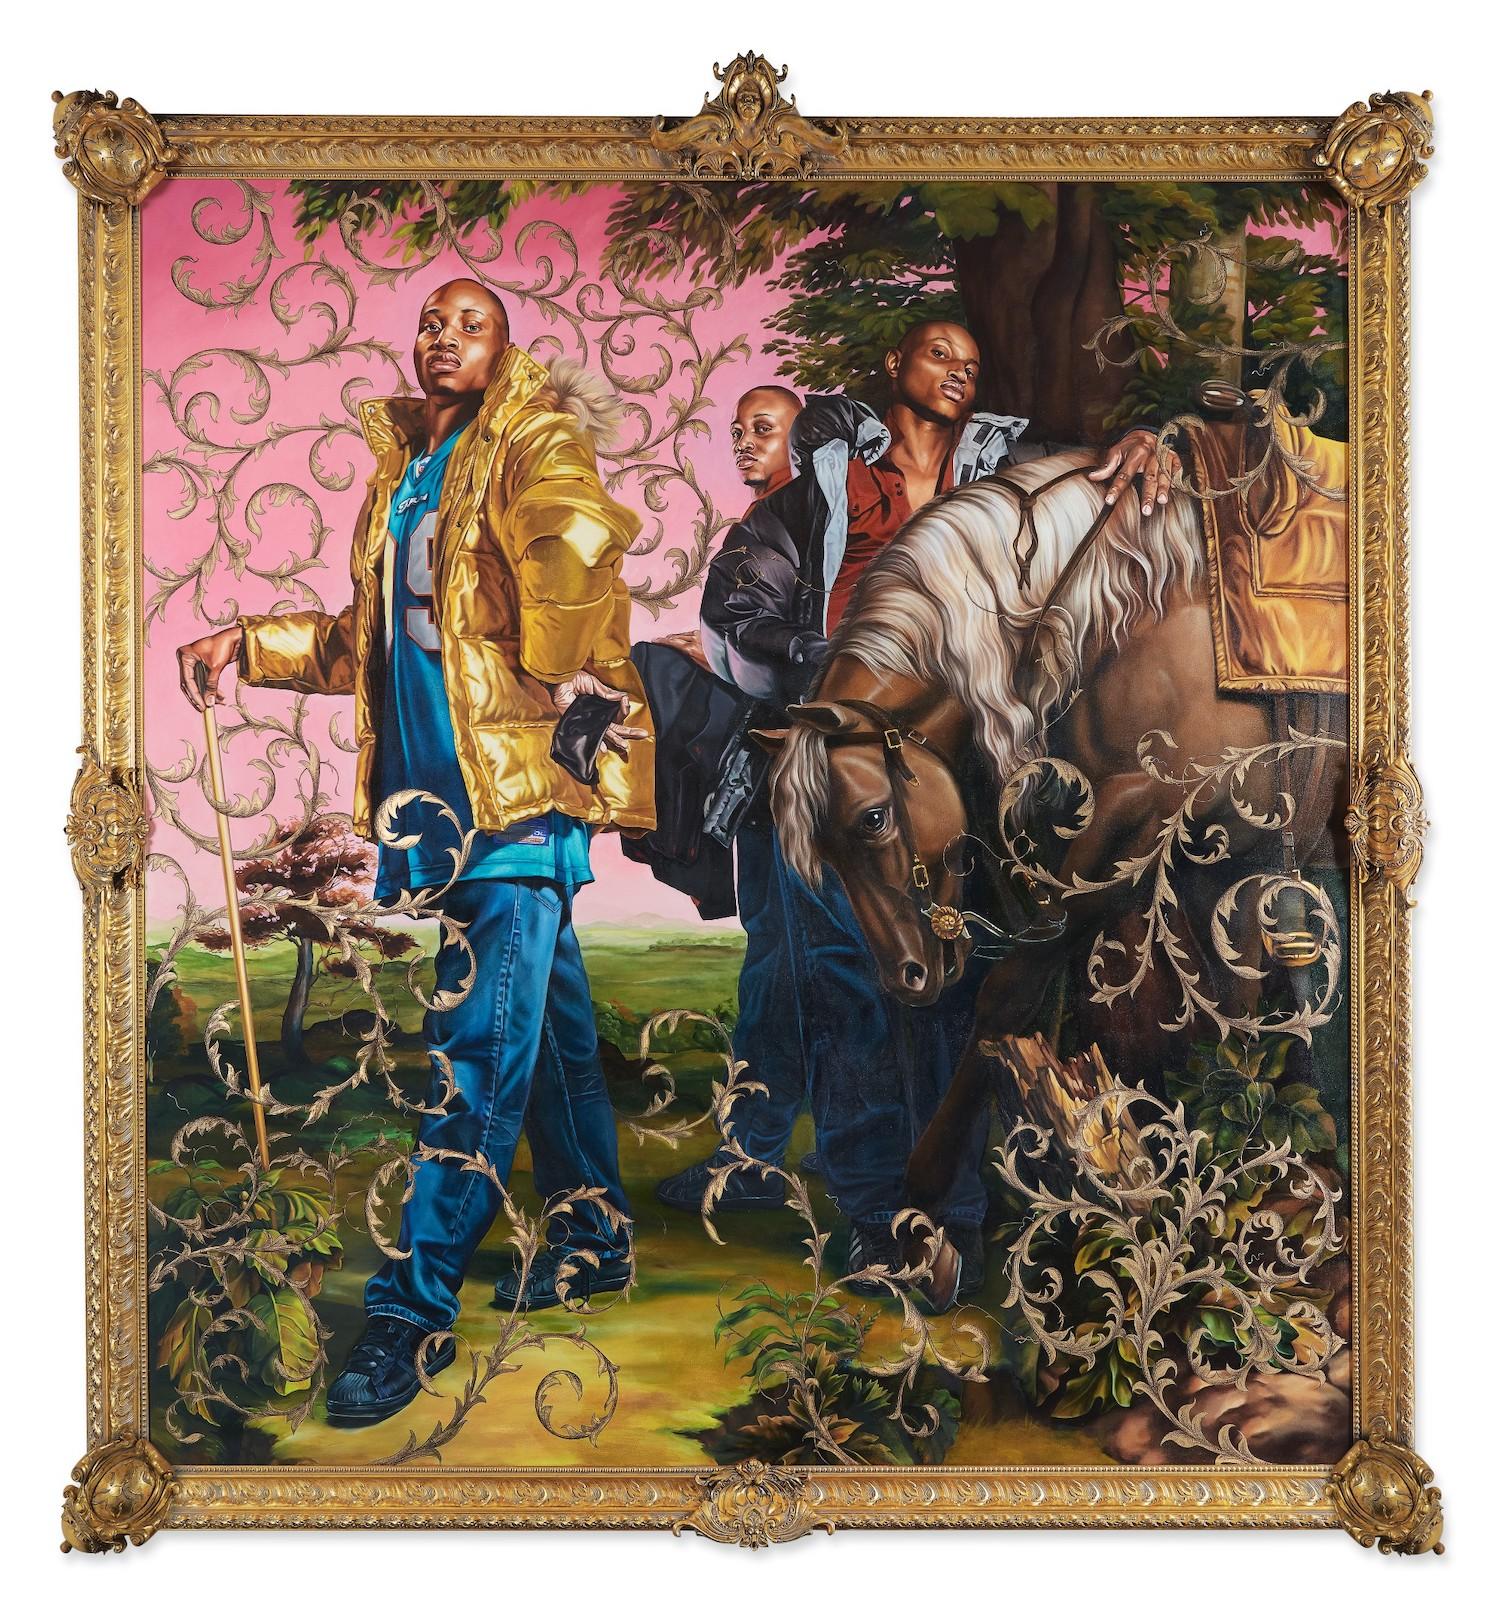 Kehinde Wiley, LE ROI À LA CHASSE II, 2007. Oil on canvas. 122 x 119 in. (209.9 x 302.3 cm).